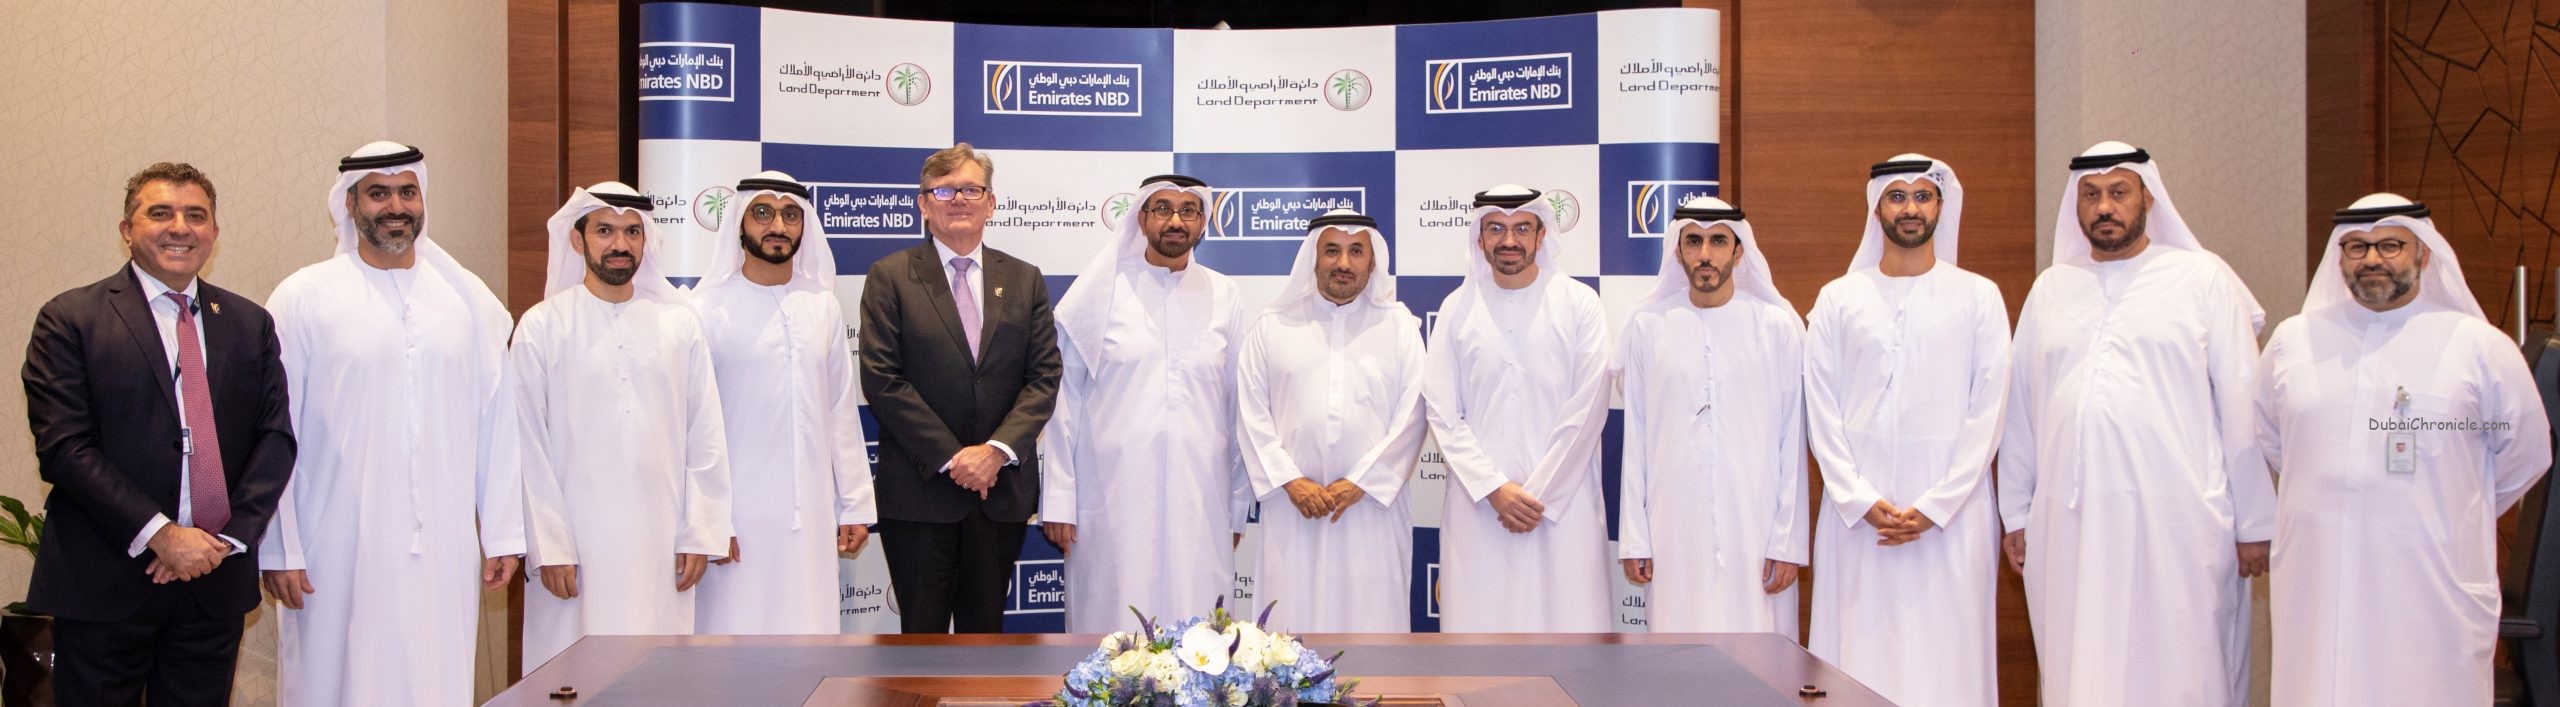 Dubai Land Department has partnered with Emirates NBD on landmark initiatives aimed at boosting and strengthening the UAE’s real estate proposition.